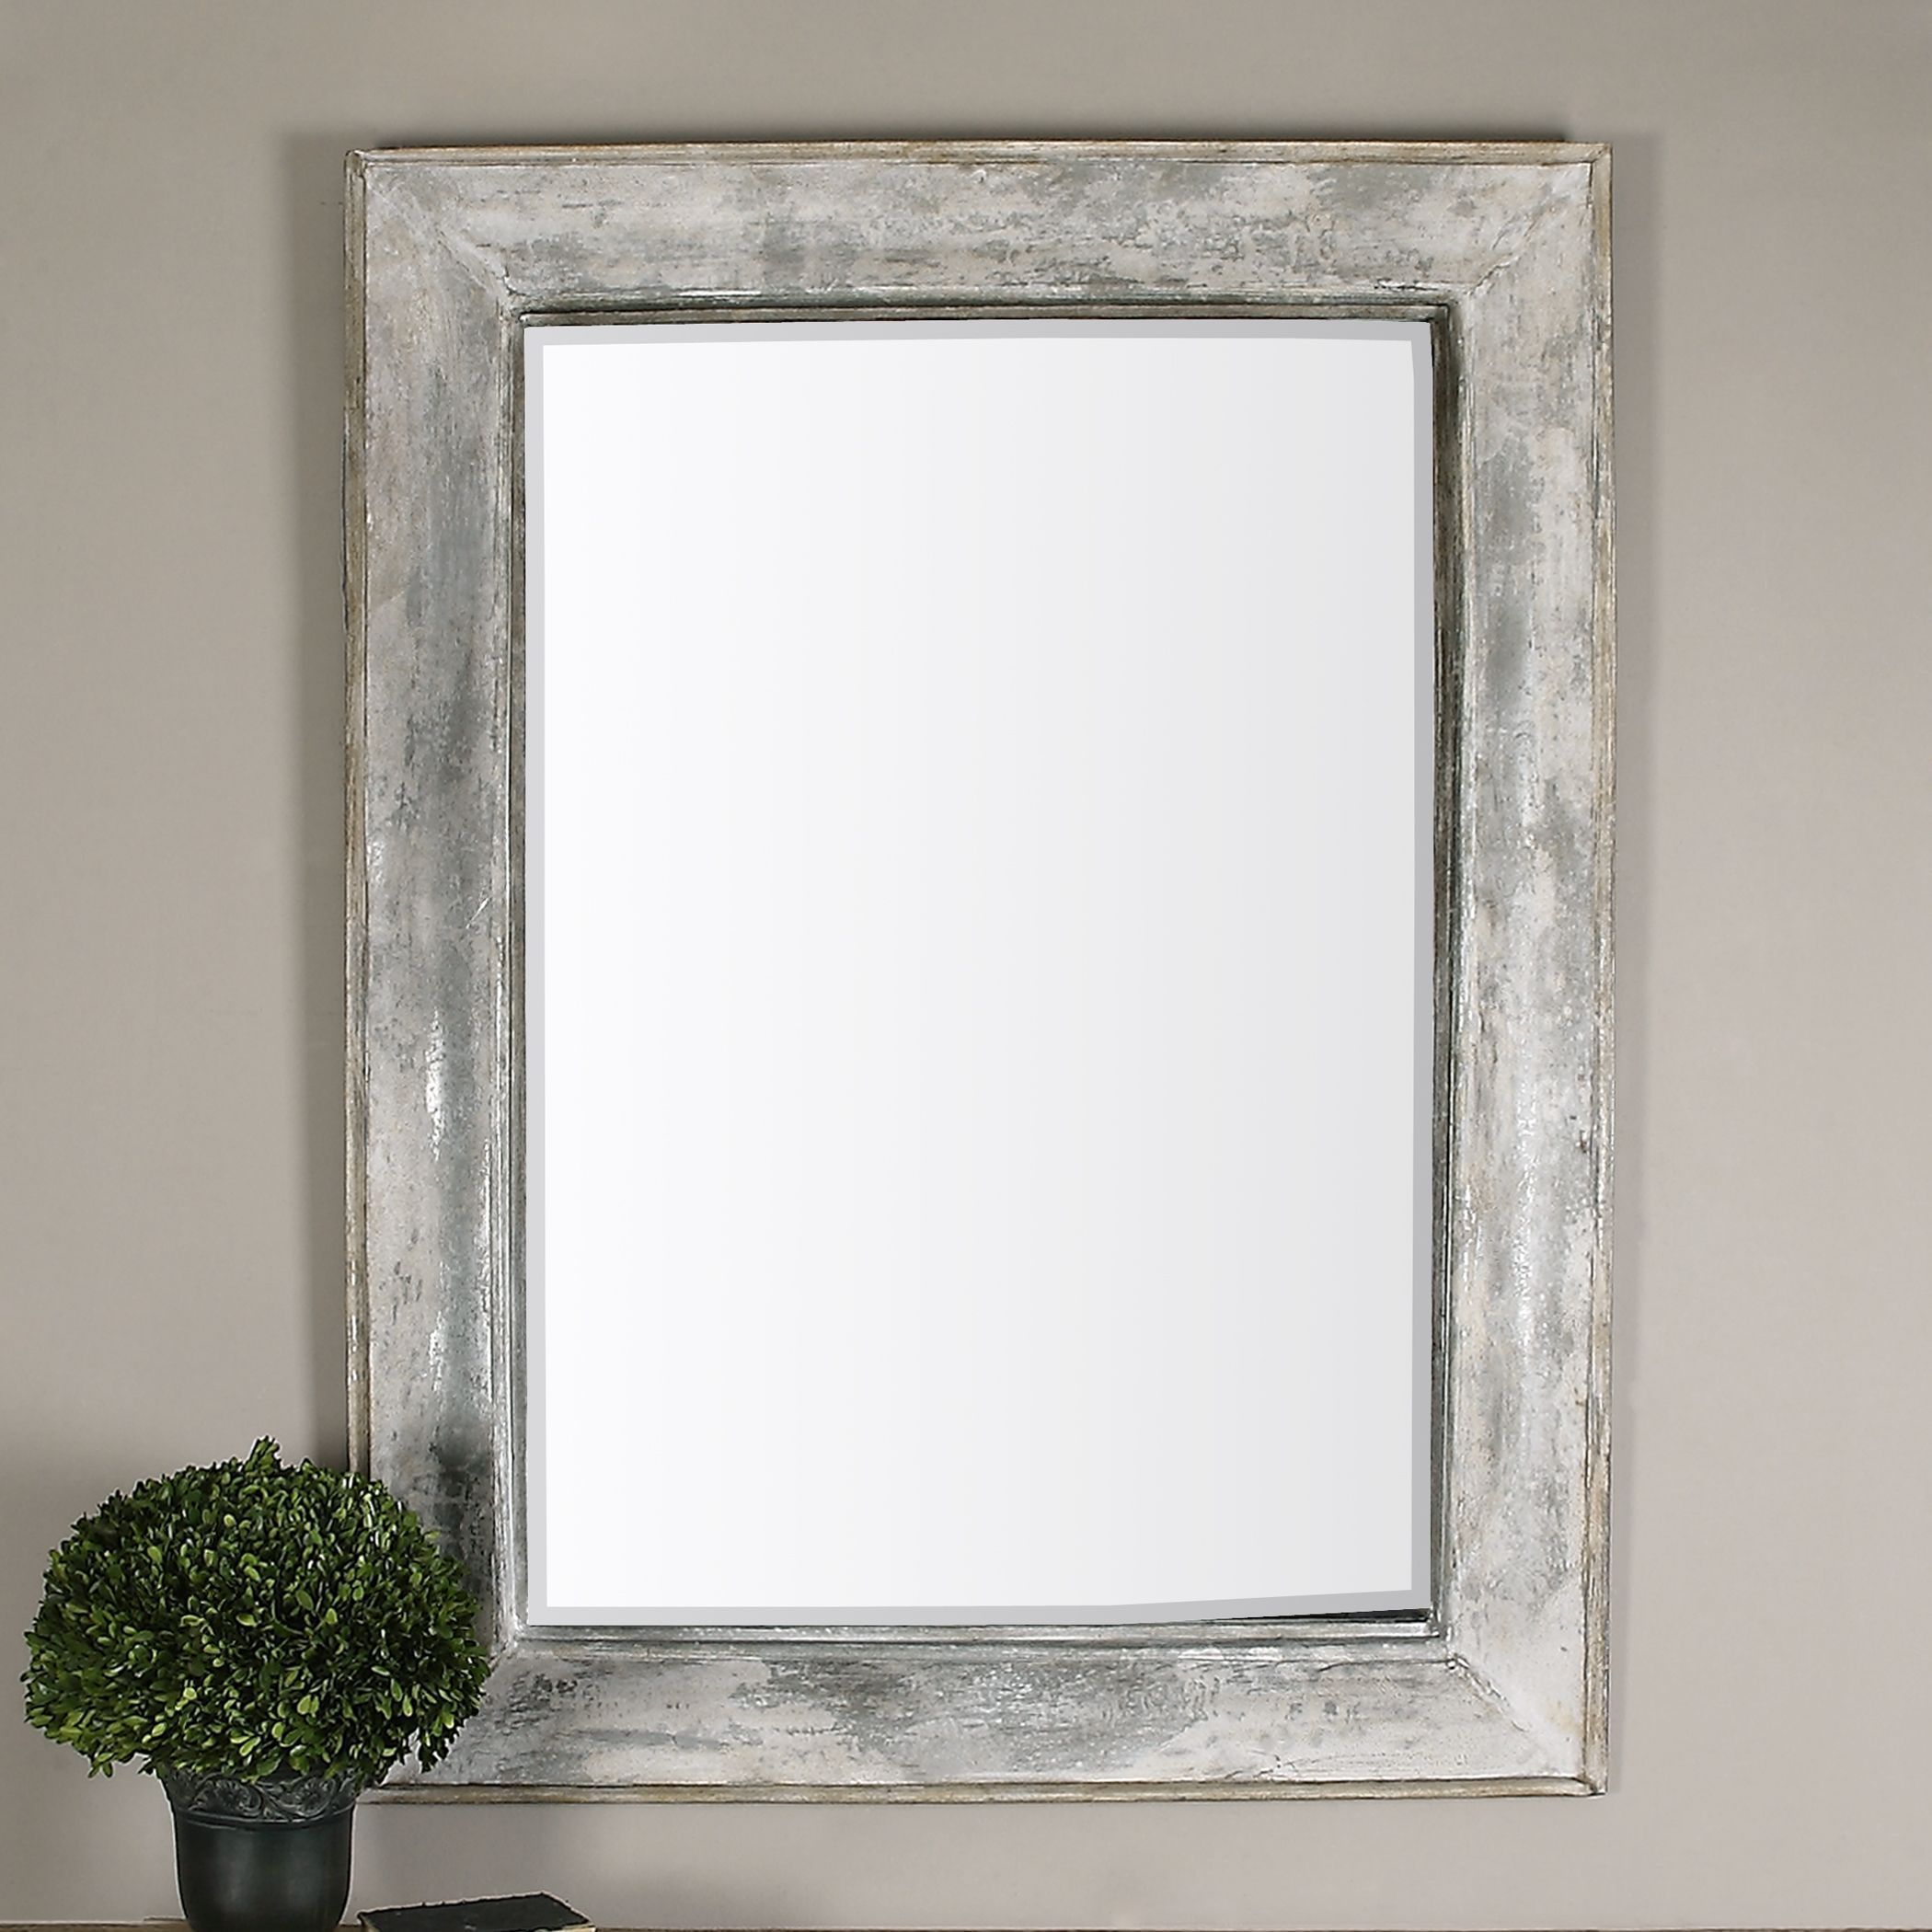 Morava Rust Aged Gray Mirror | Gray Mirror, Barn Wood Picture Frames Intended For Gray Washed Wood Wall Mirrors (View 5 of 15)